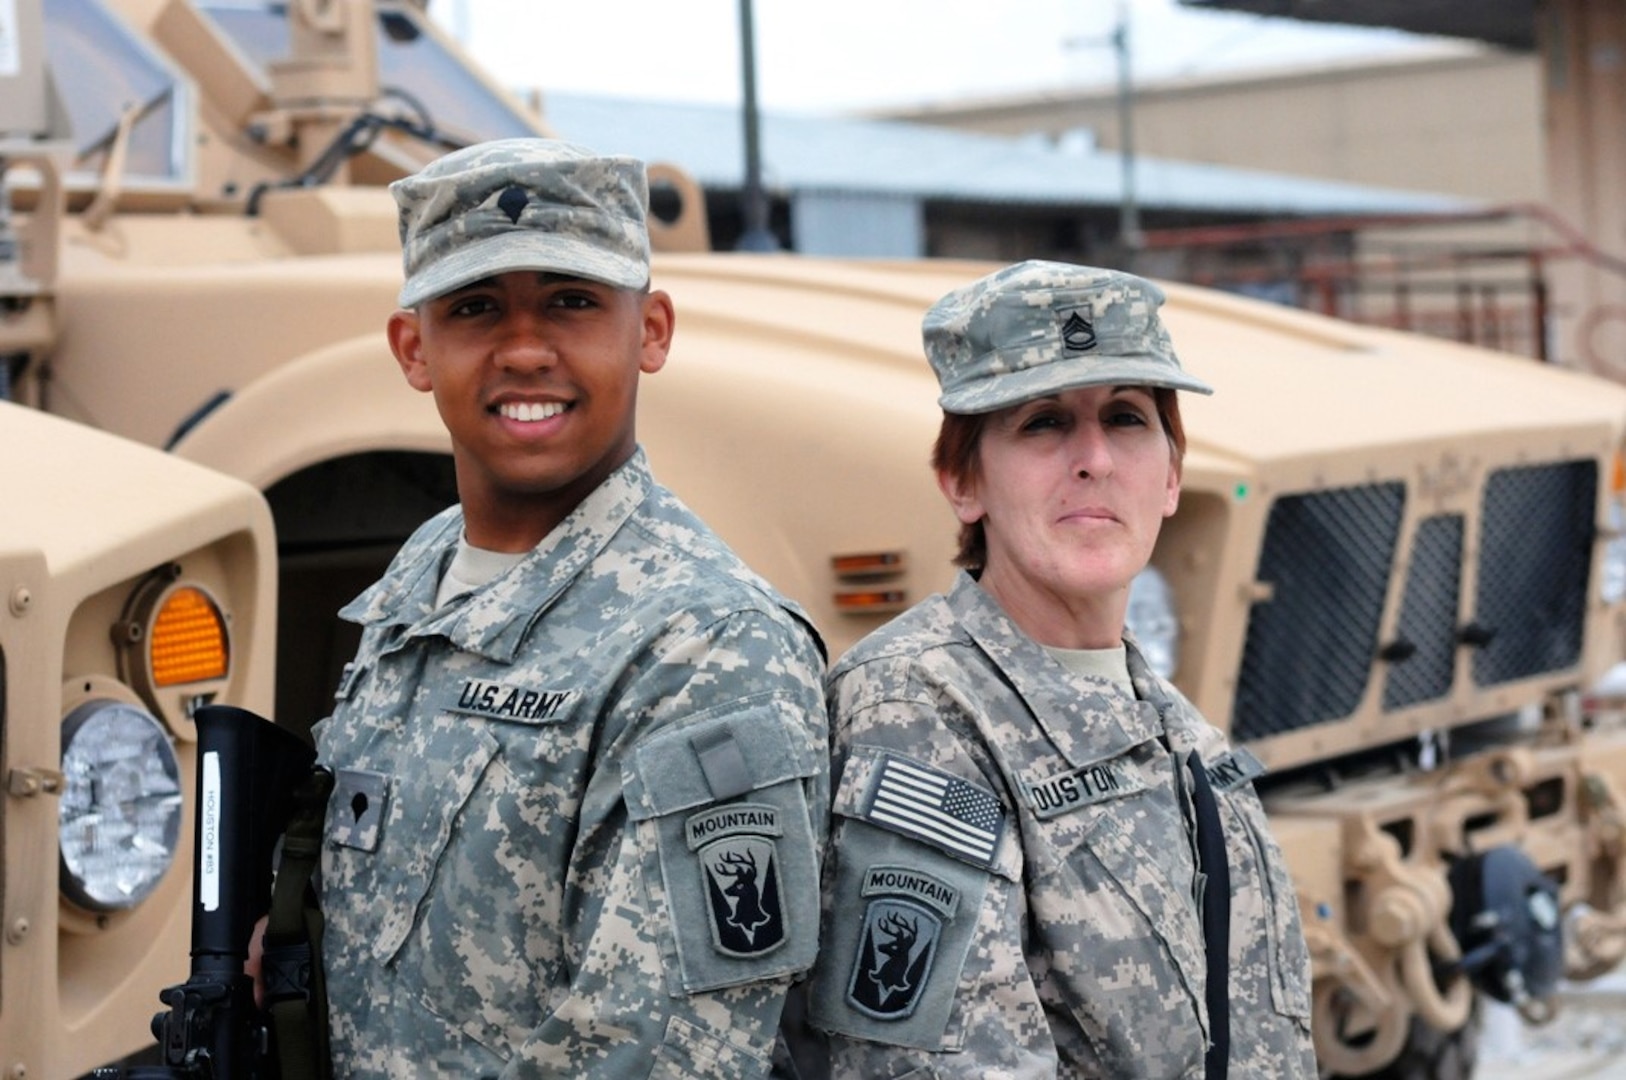 Sgt. 1st Class Maureen A. Houston and Spc. Brion Houston, both of the 86th Infantry Brigade Combat Team of the Vermont Army National Guard, are currently deployed together to Afghanistan.